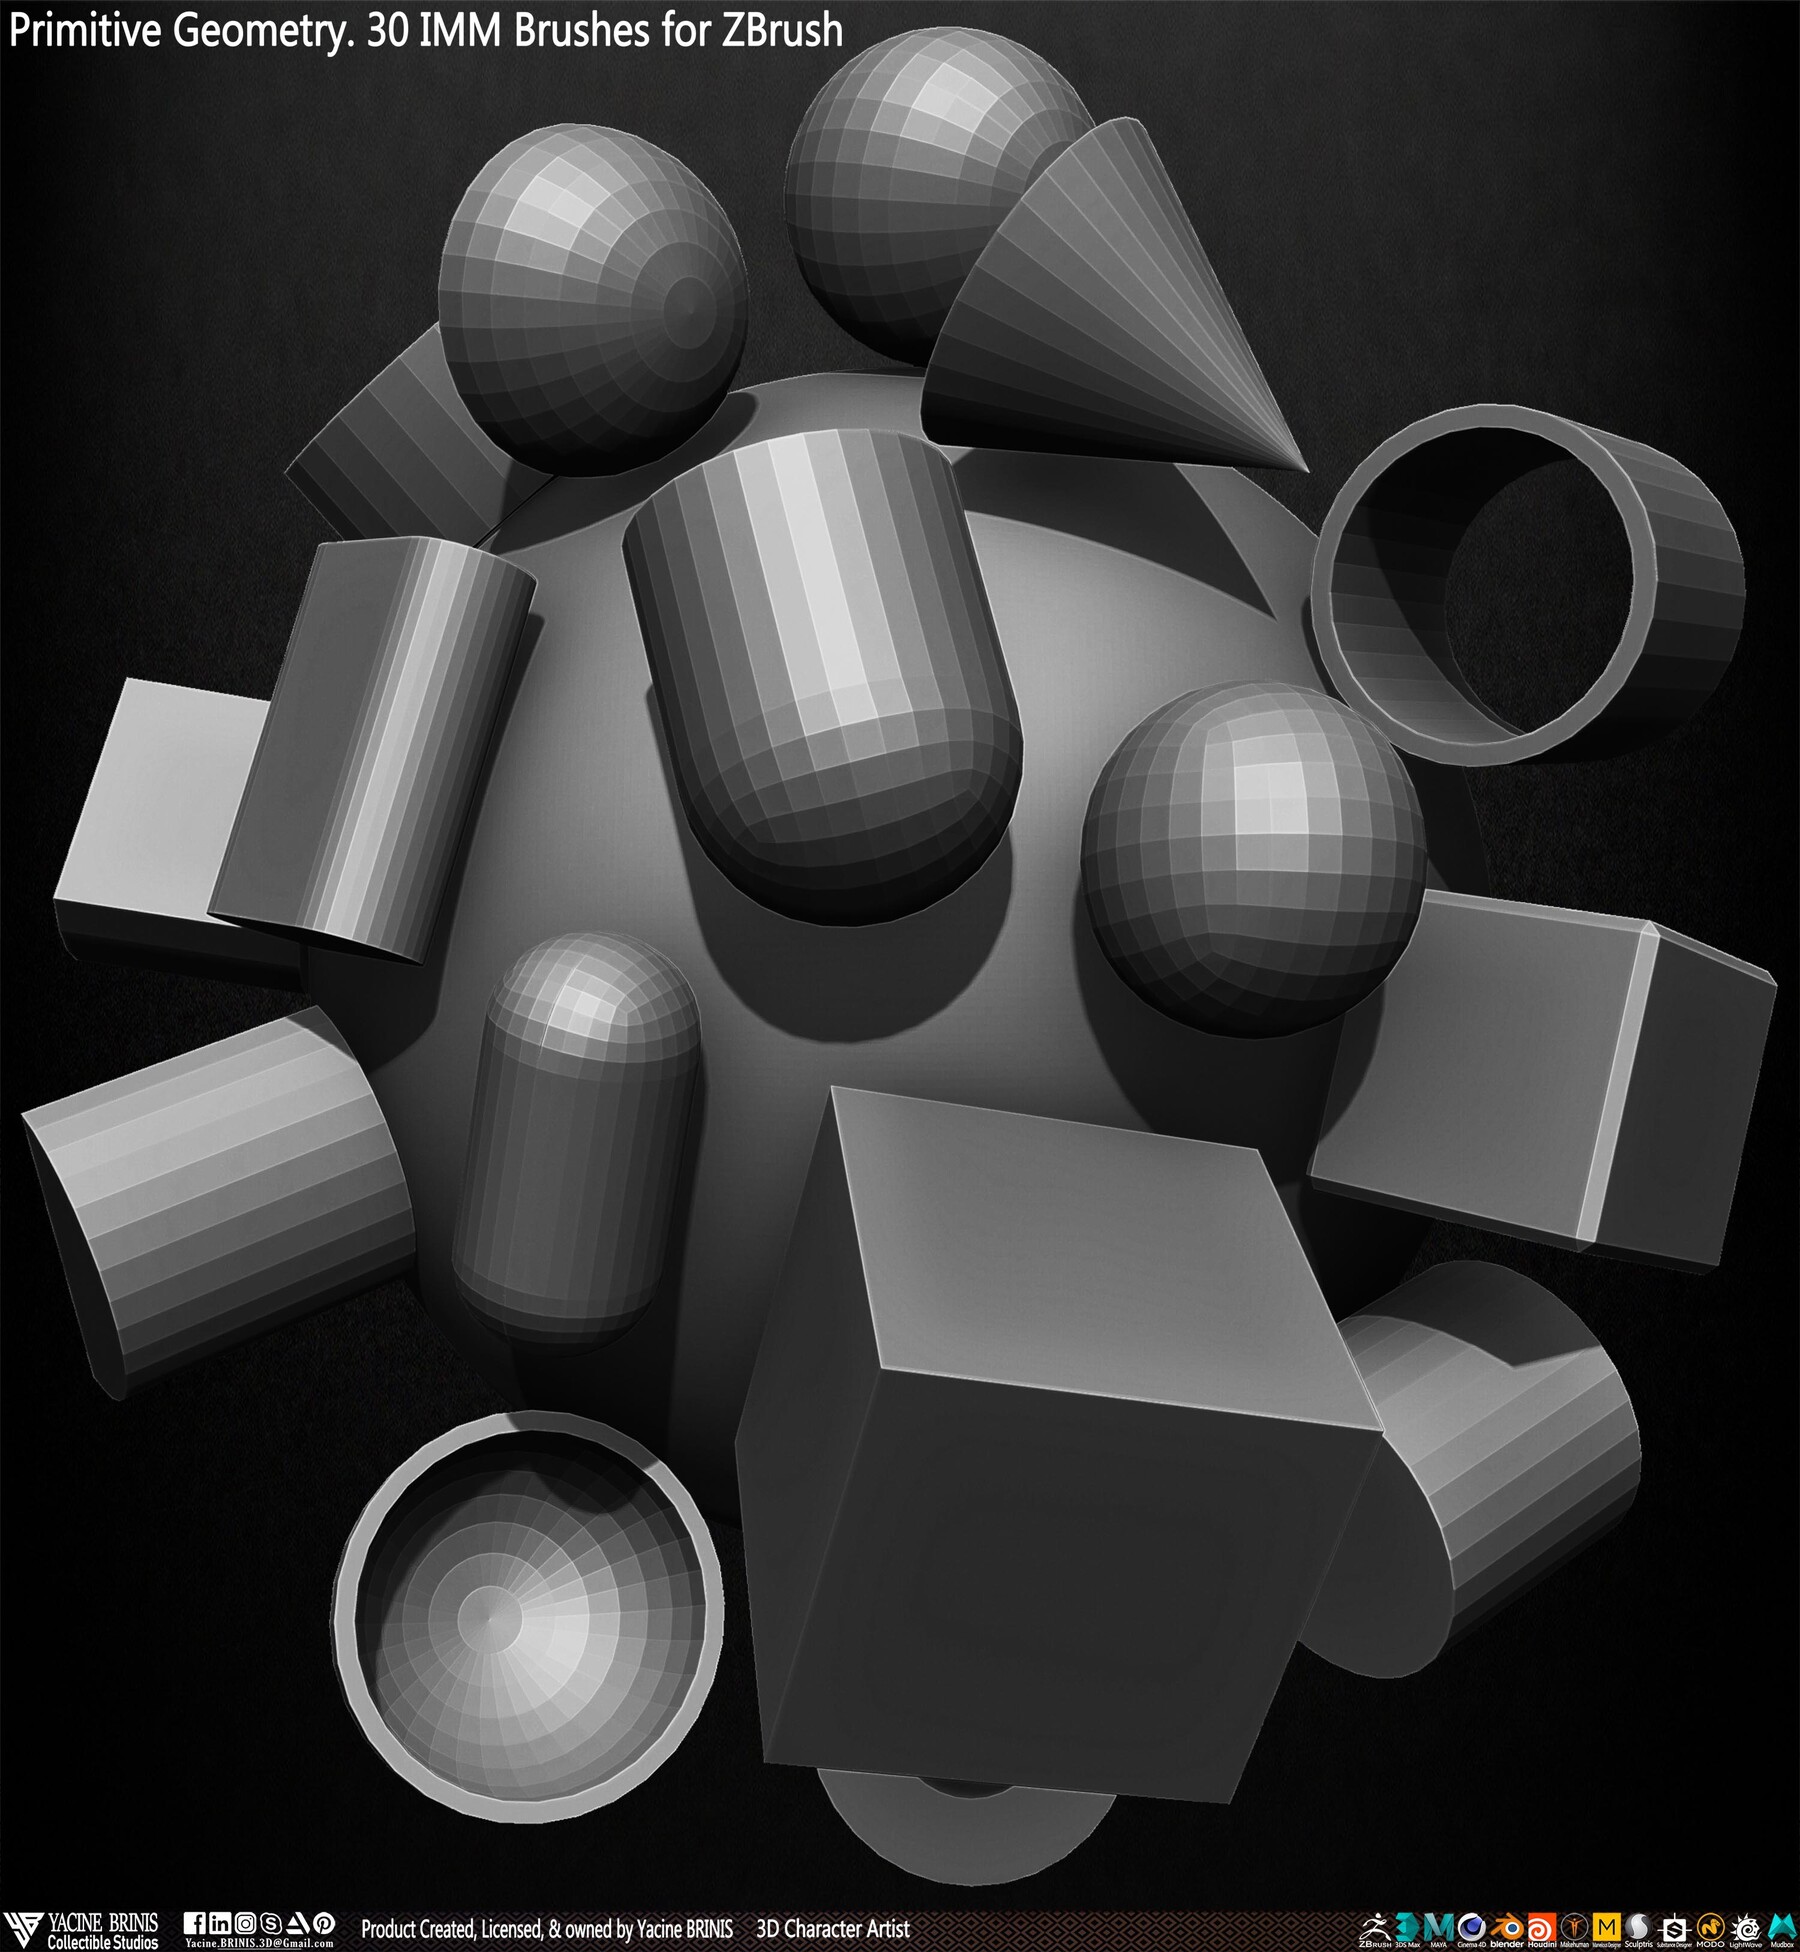 drawing geometry in zbrush